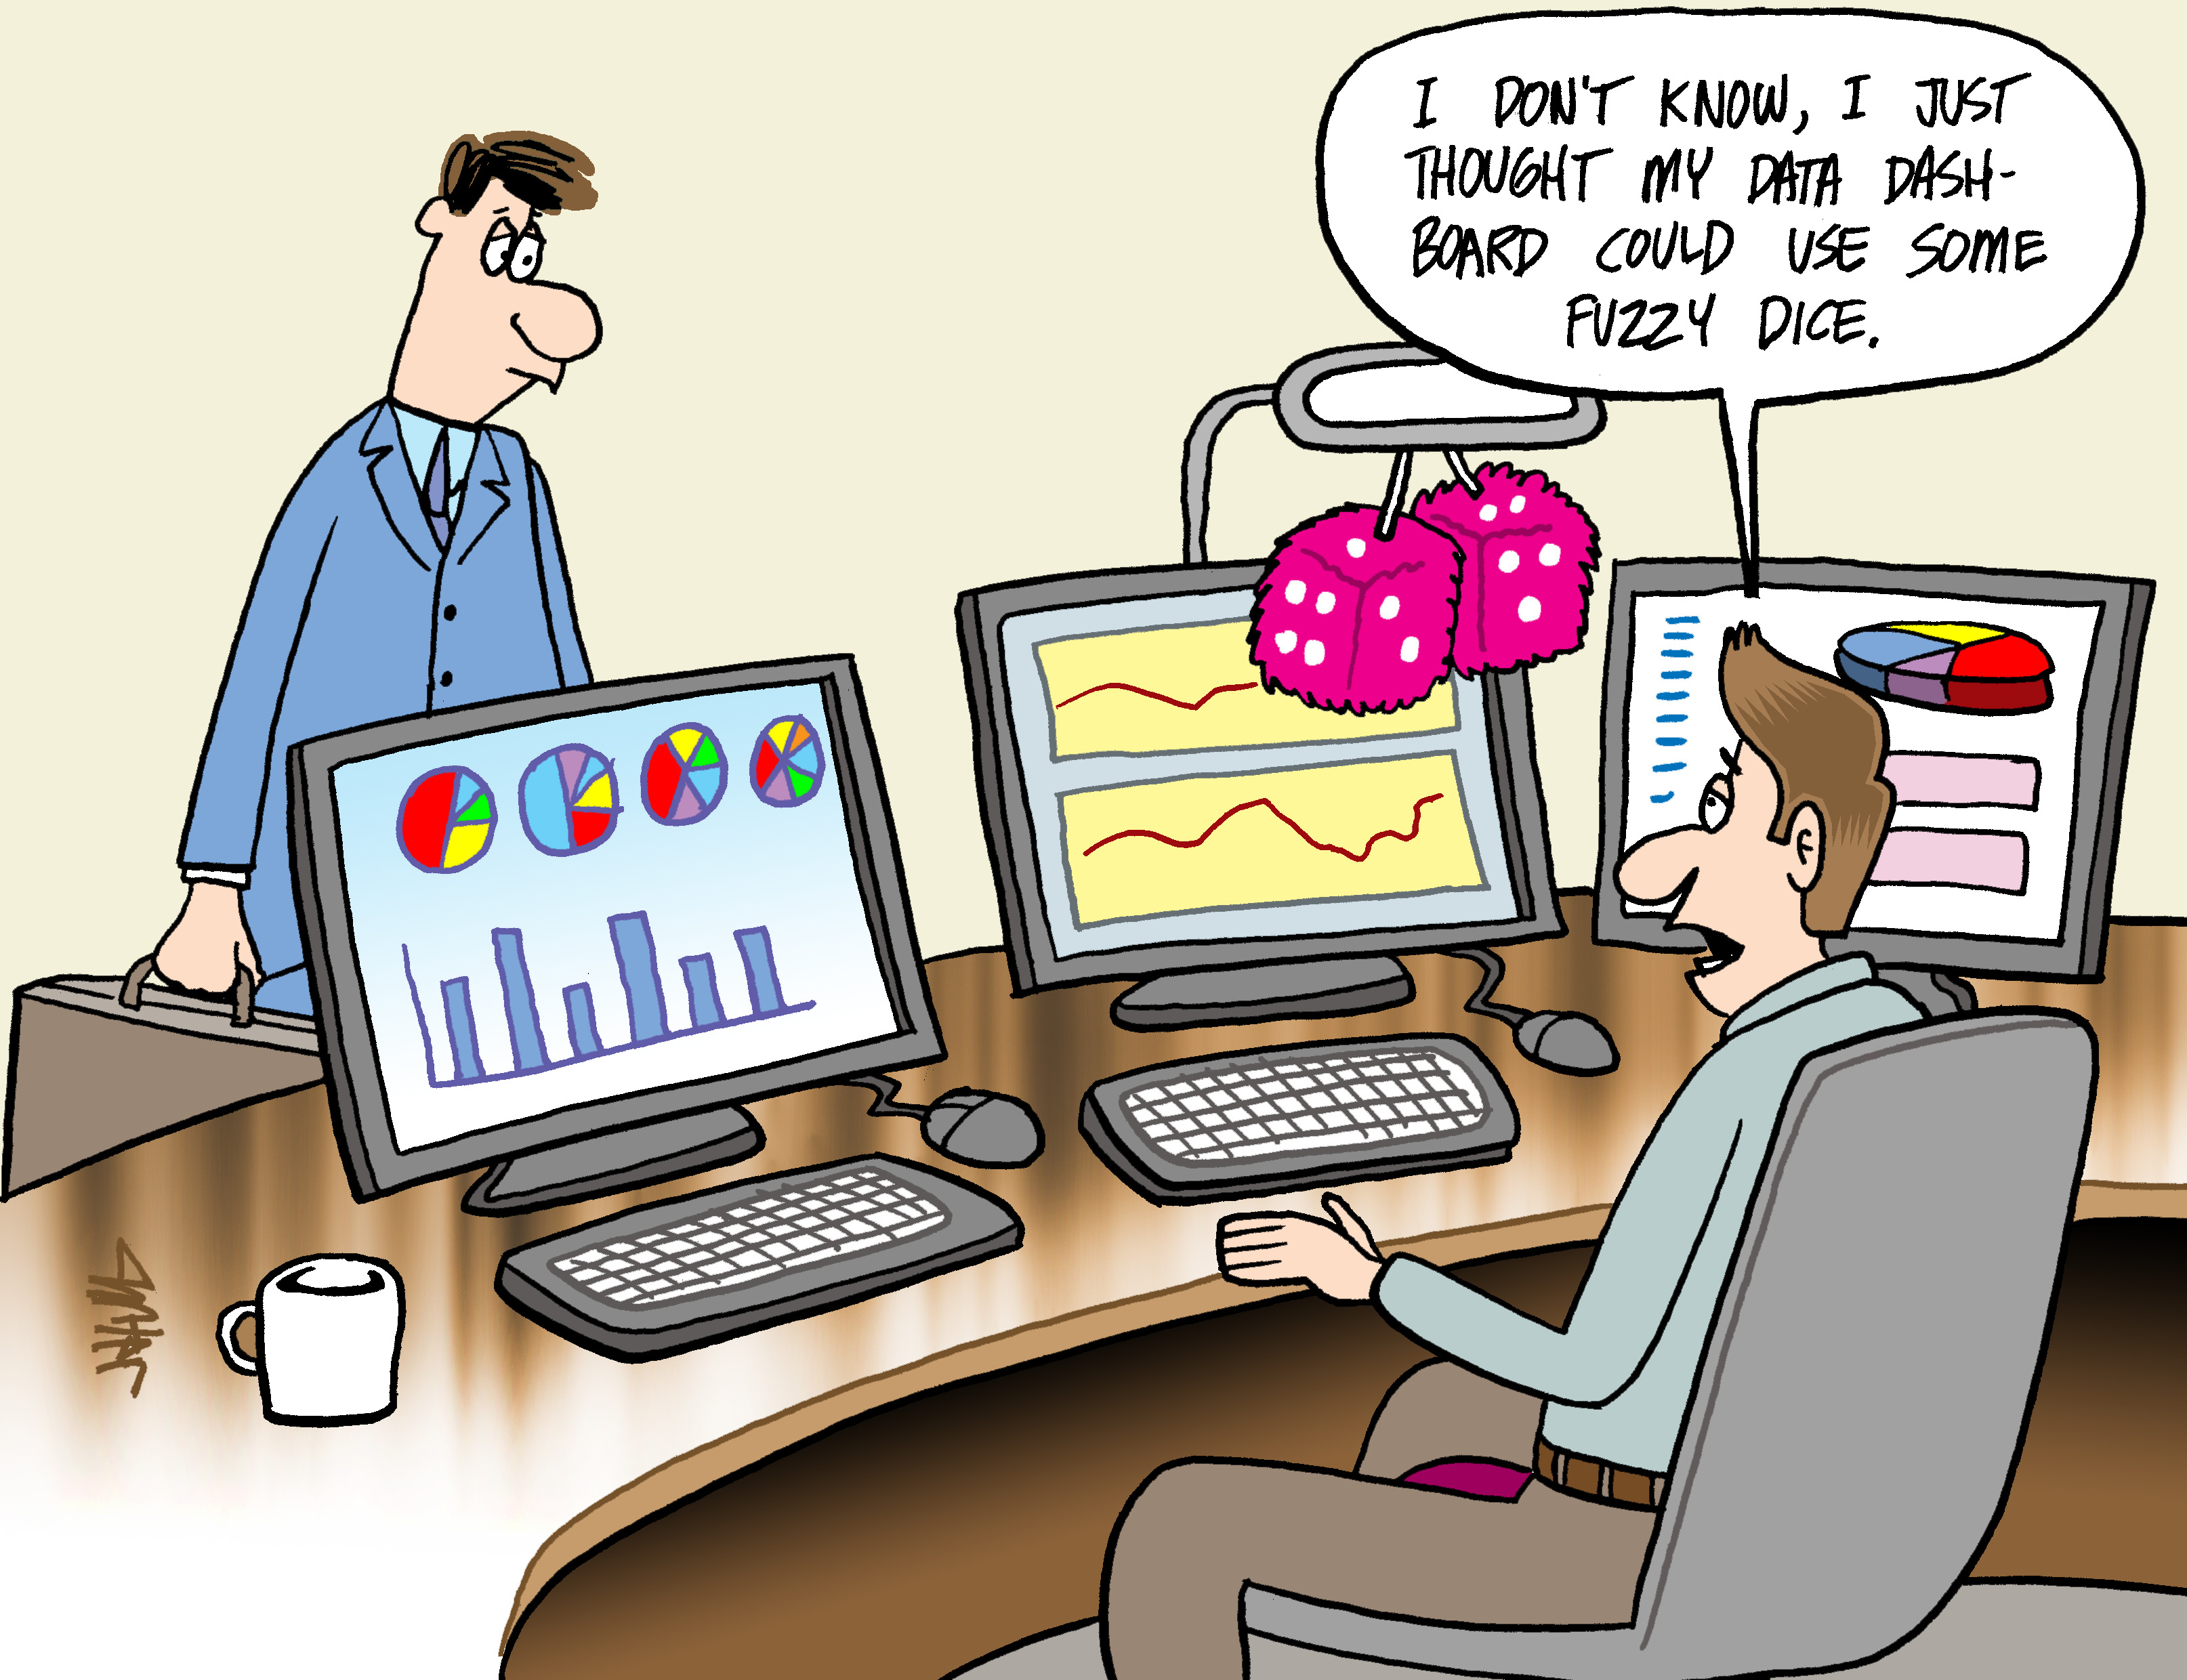 aa cartoon with someone at a group of computers with fuzzy dice hanging from one and says: I just thought my data dashboard could use some fuzzy dice.